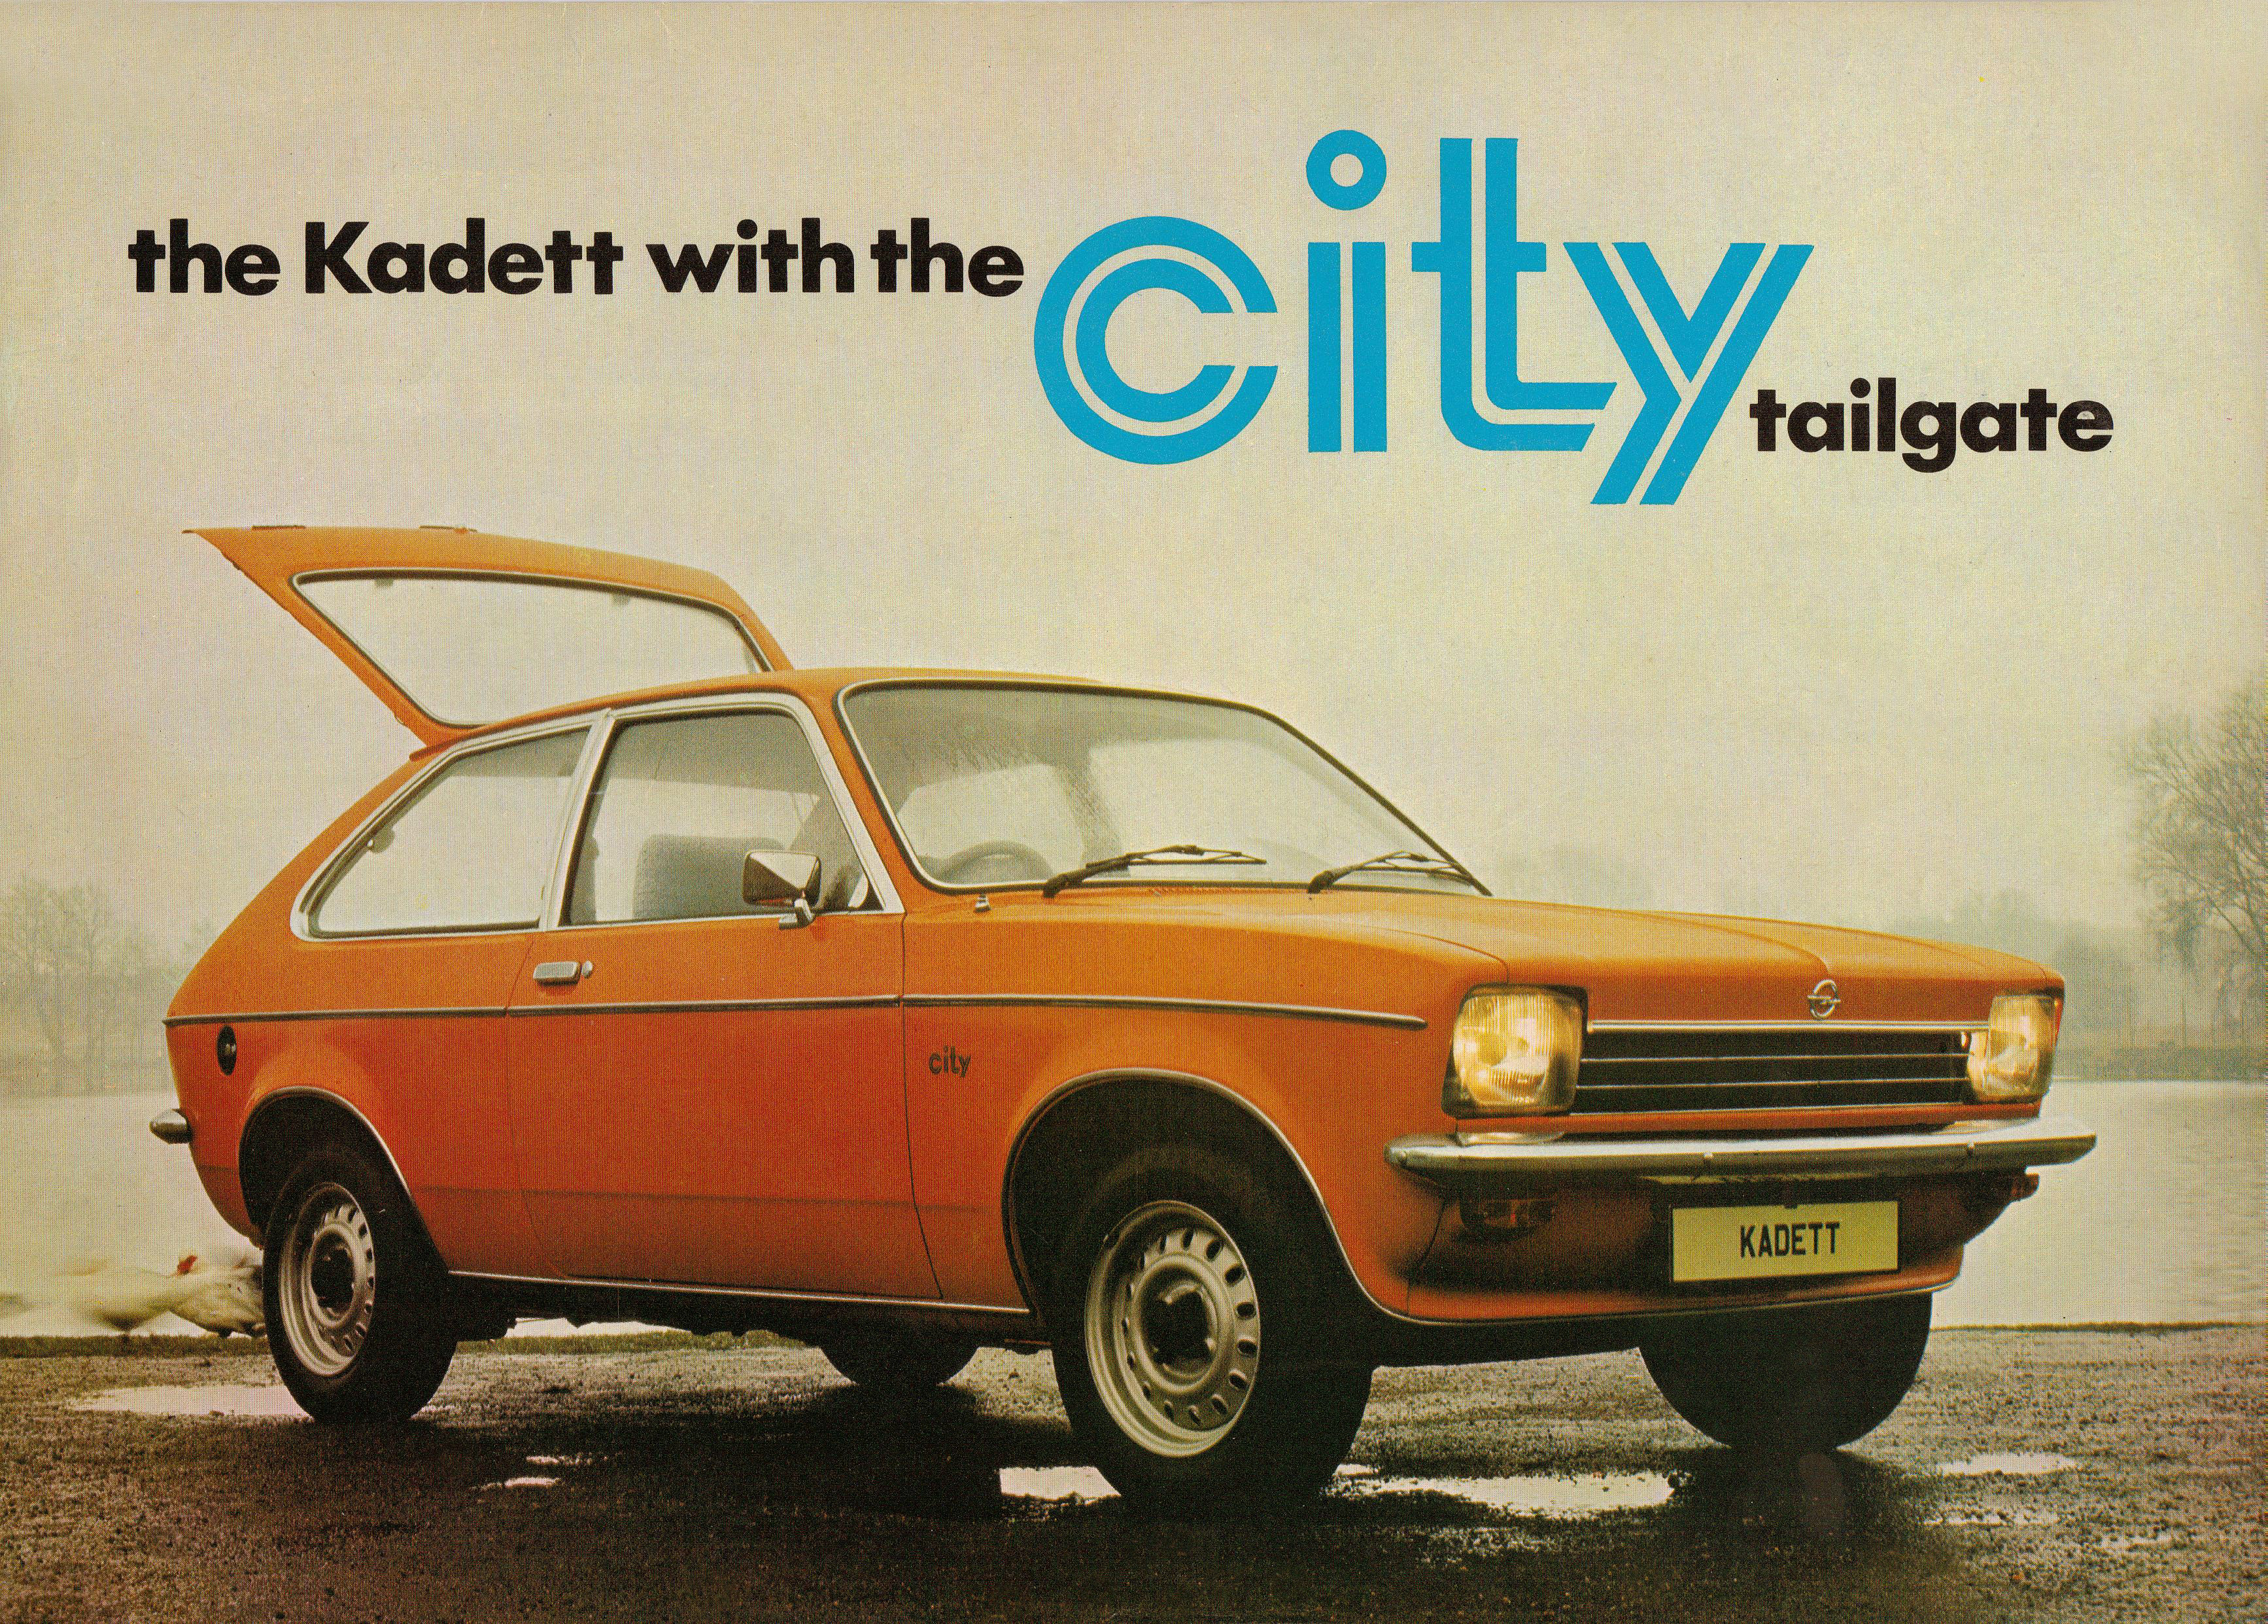 1975 Opel Kadett City. Published on August 14, 2012 1:37 pm. Filed under: